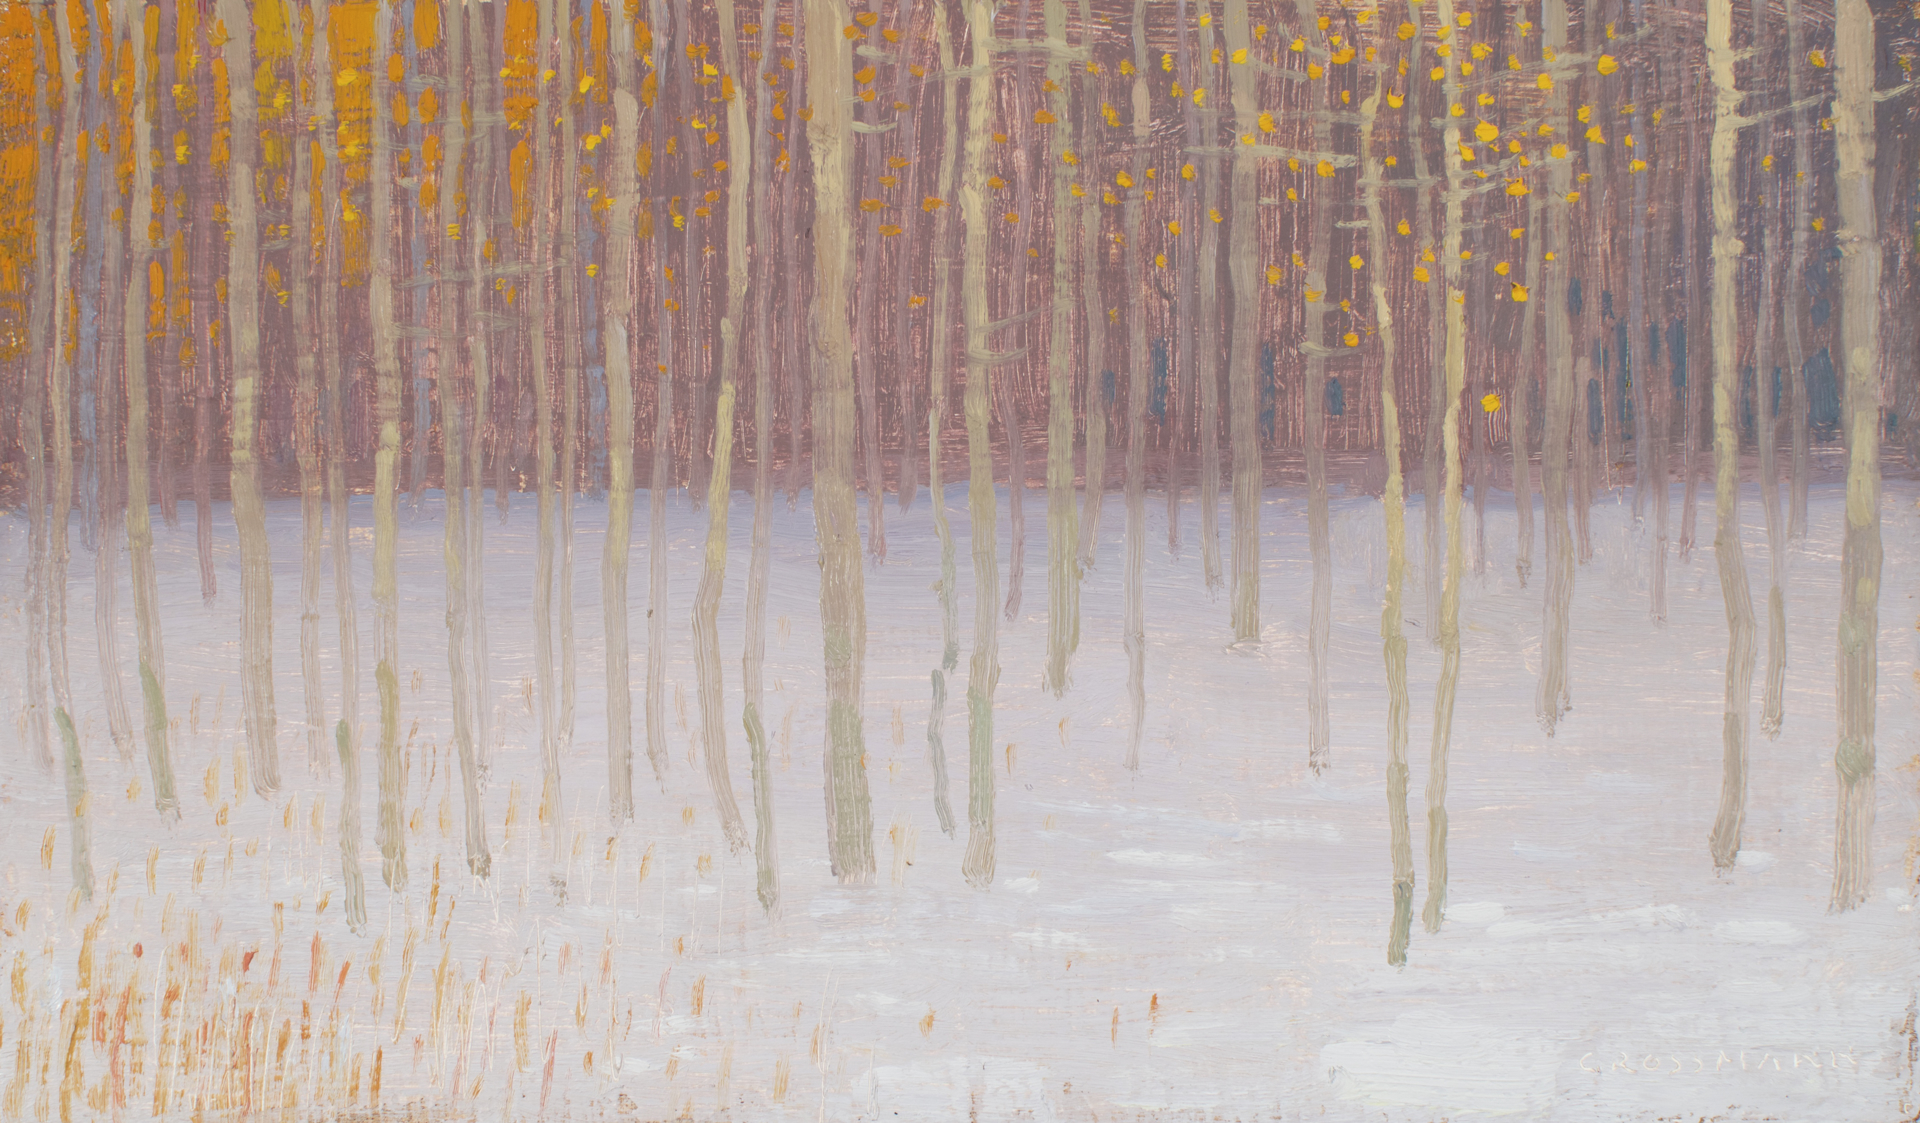 Snow and Remants of Autumn Colors by David Grossmann